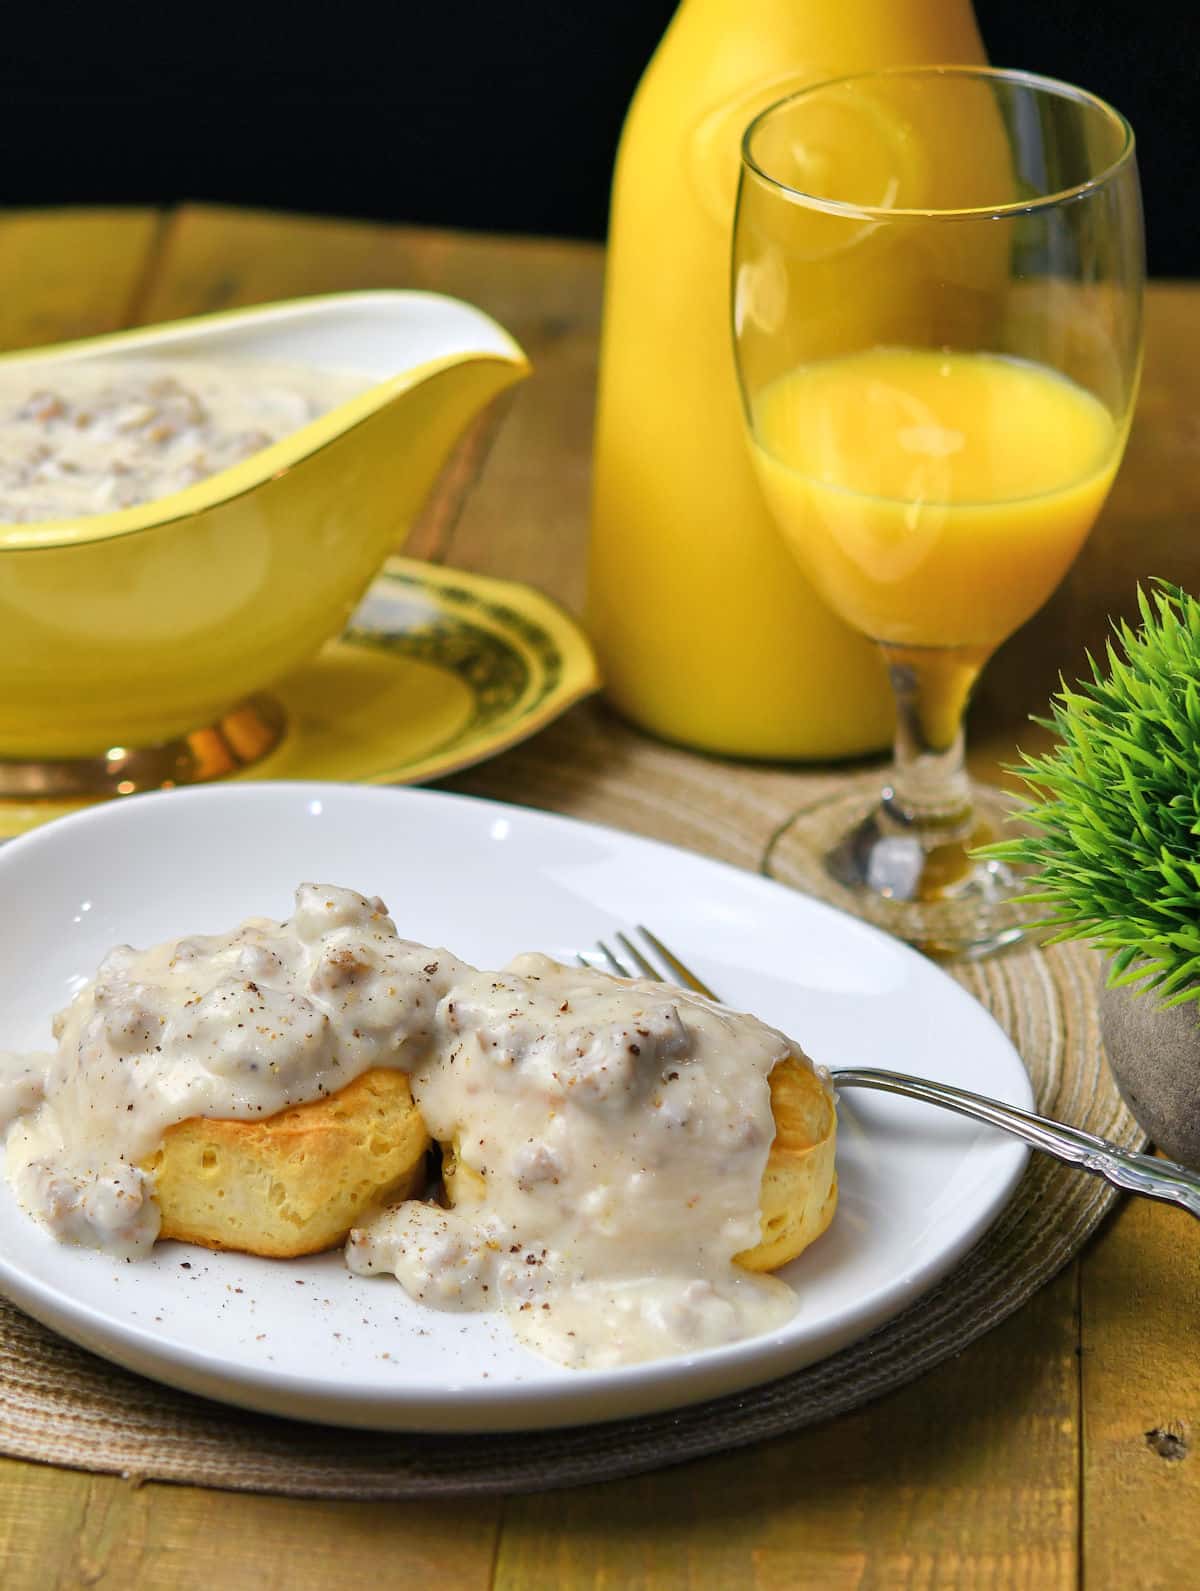 Homemade Sausage Gravy served on biscuits with glass of orange juice